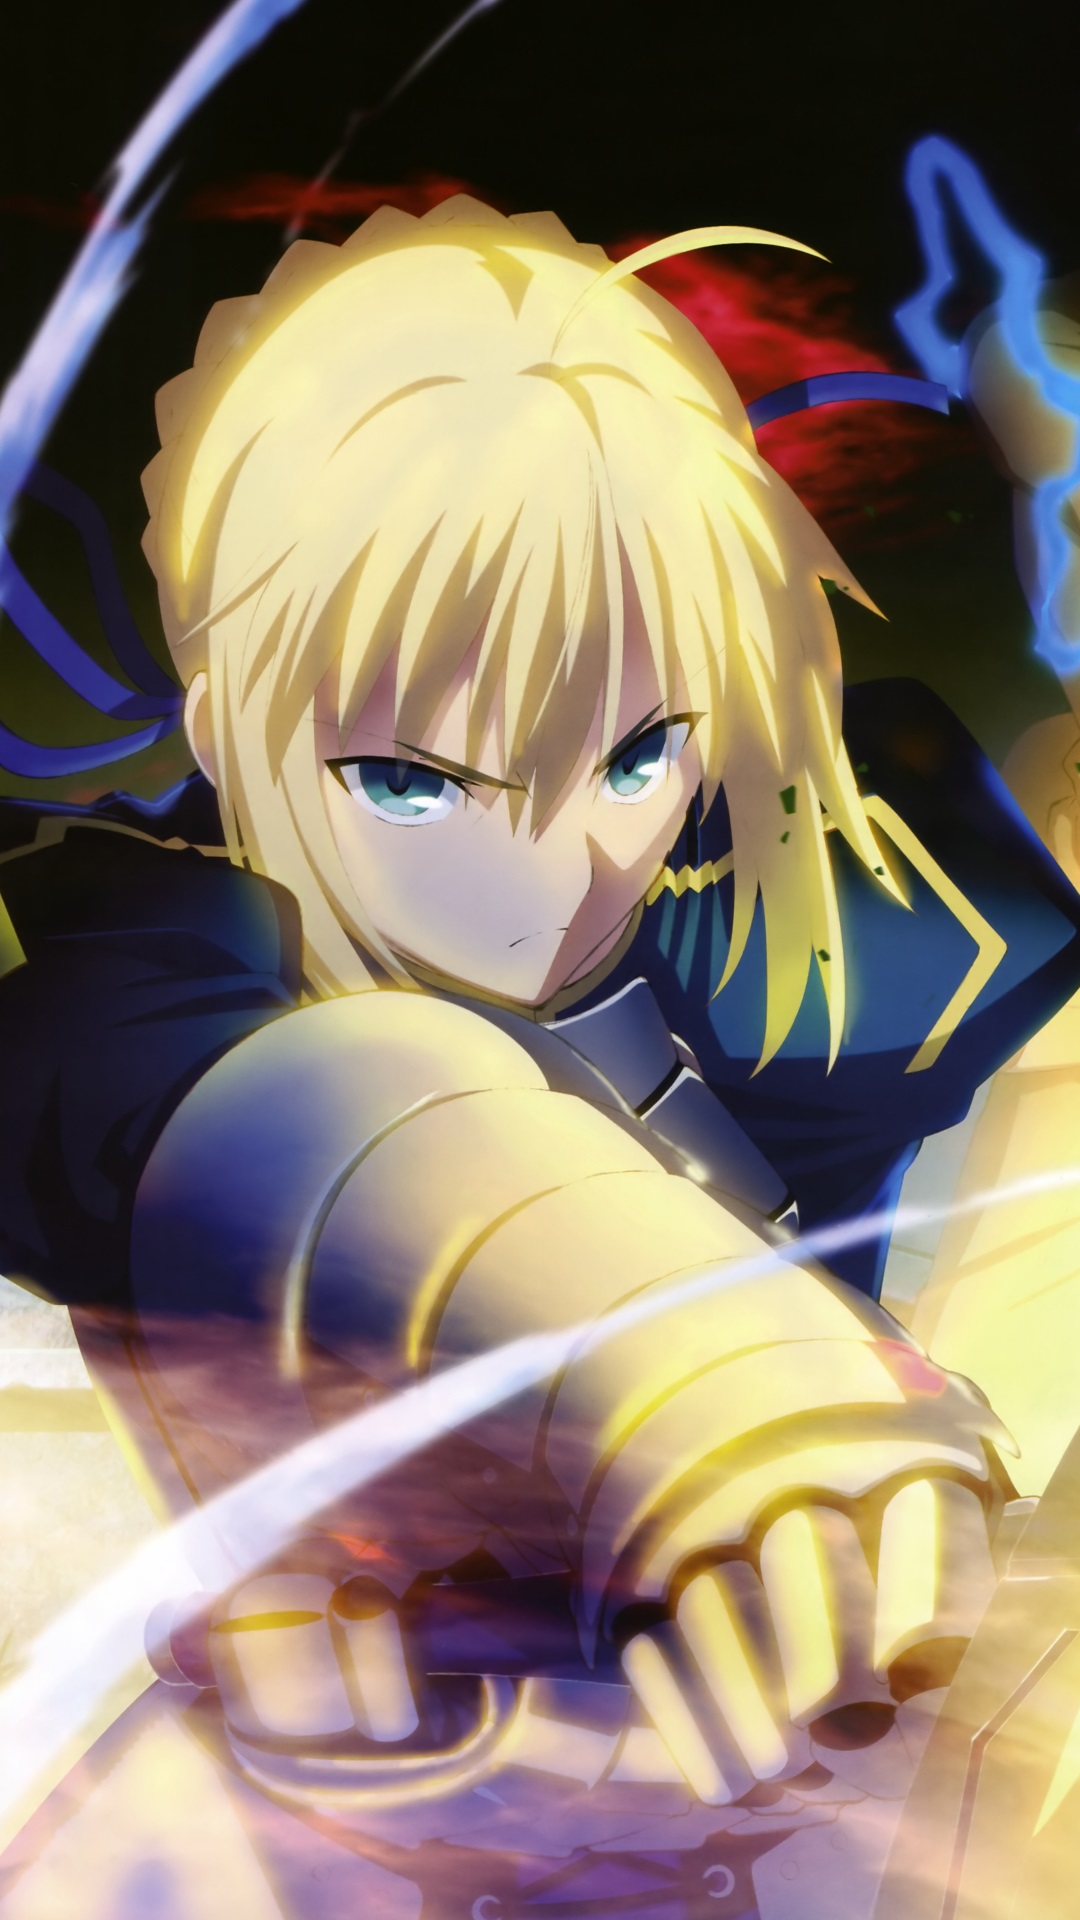 Fate Stay Night Unlimited Blade Works Saber - Fate Stay Night Saber Wallpaper Android , HD Wallpaper & Backgrounds